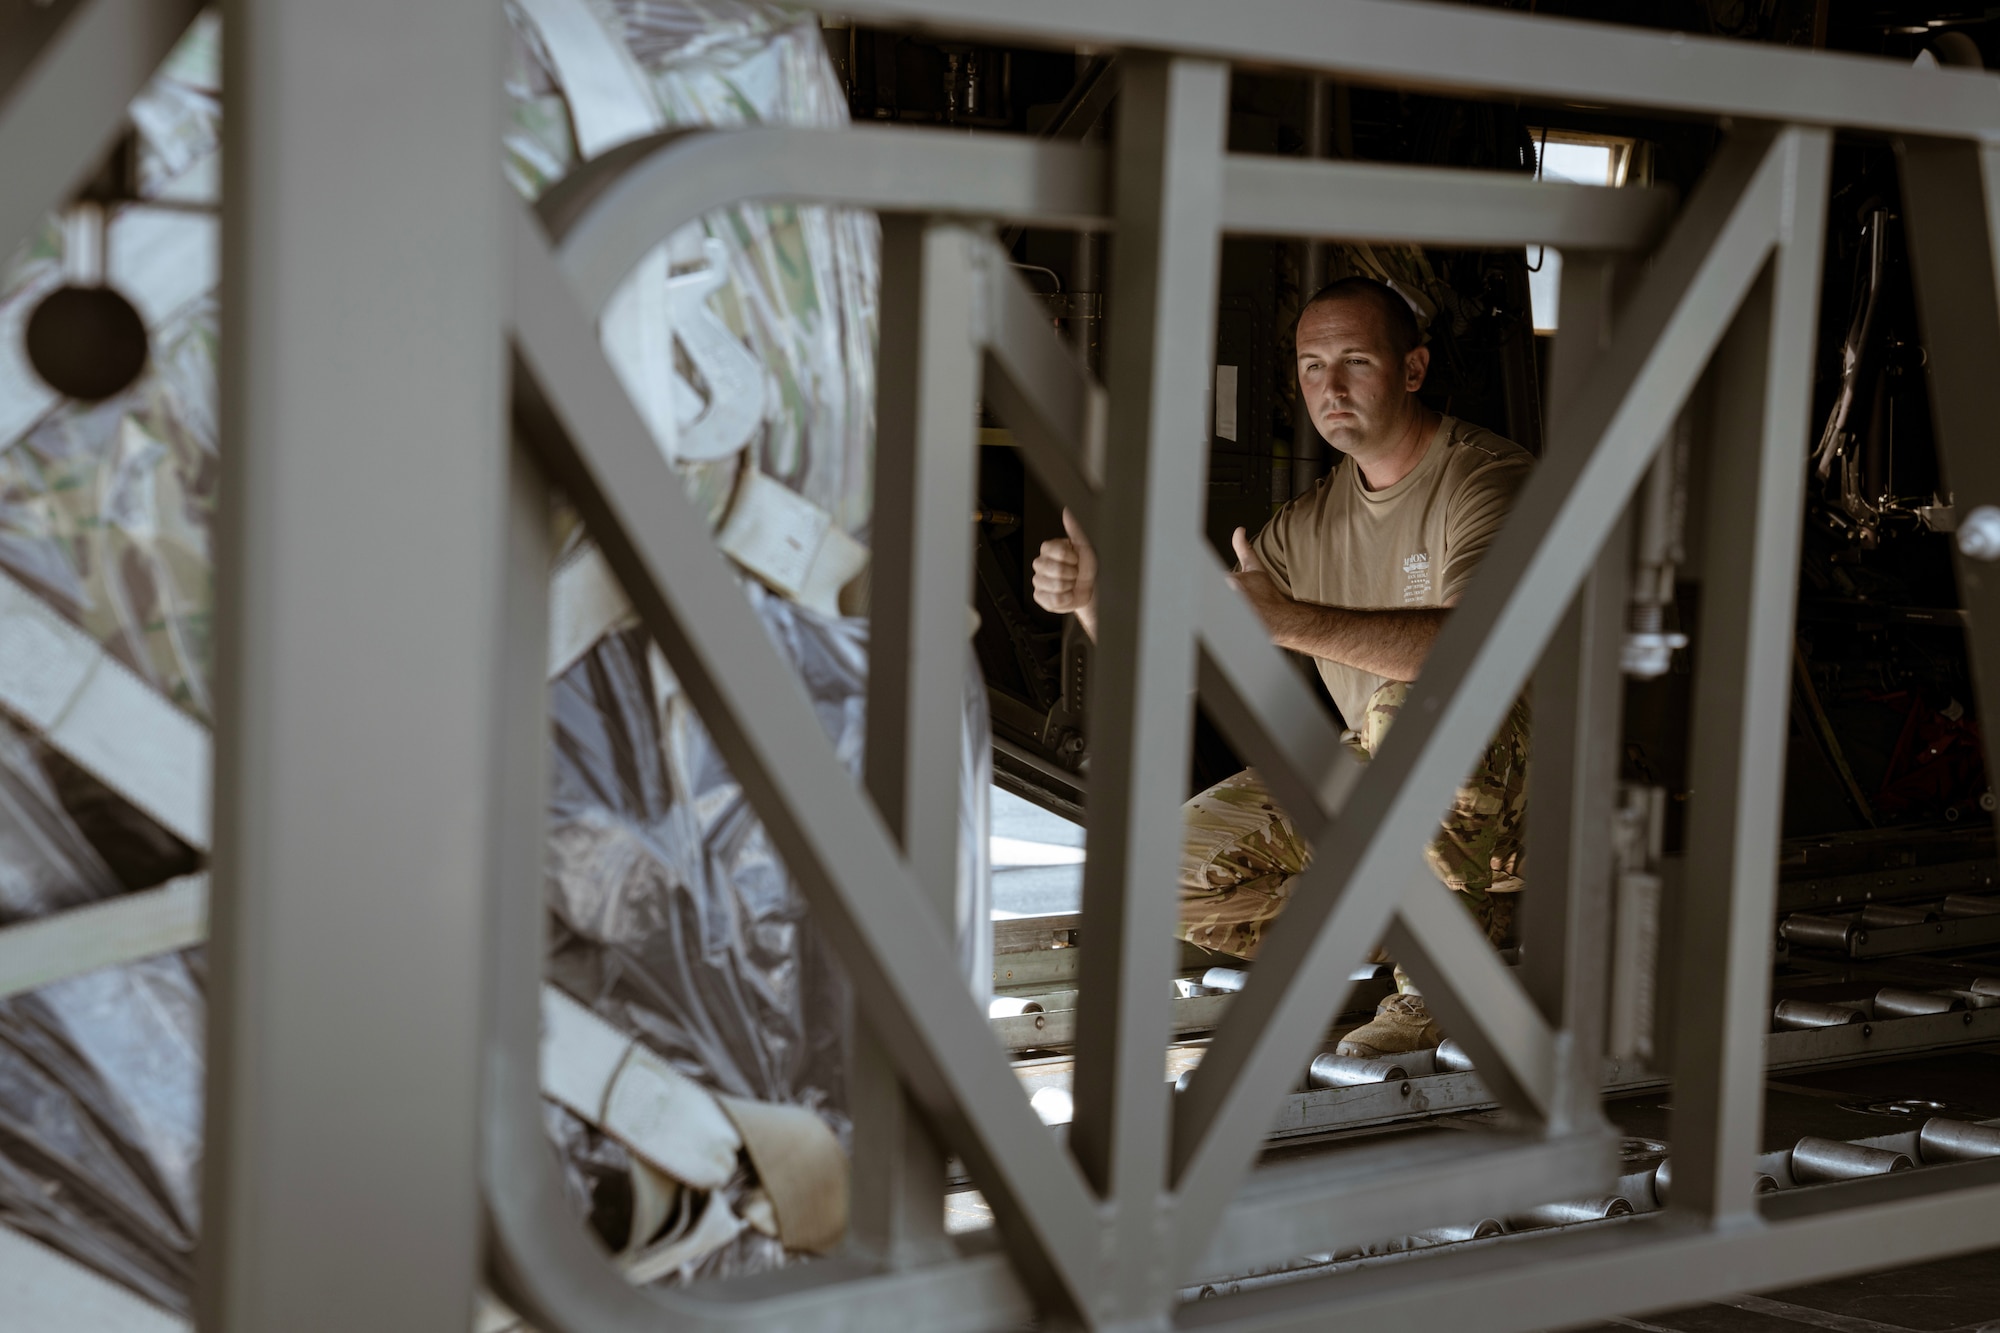 A 700th Airlift Squadron loadmaster gives directions as a pallet of gear is loaded onto a C-130 Hercules aircraft at Dobbins Air Reserve Base, Ga, on Sept. 8, 2023. The gear was being loaded in preparation for the Rally in the Pacific exercise, which is geared towards incorporating agile combat employment concepts in order to ensure that forward-deployed forces are ready to protect and defend the U.S. and to ensure that U.S. forces are capable and ready to face the evolving challenges within the Indo-Pacific region. (U.S. Air Force photo by MSgt. Miles Wilson)